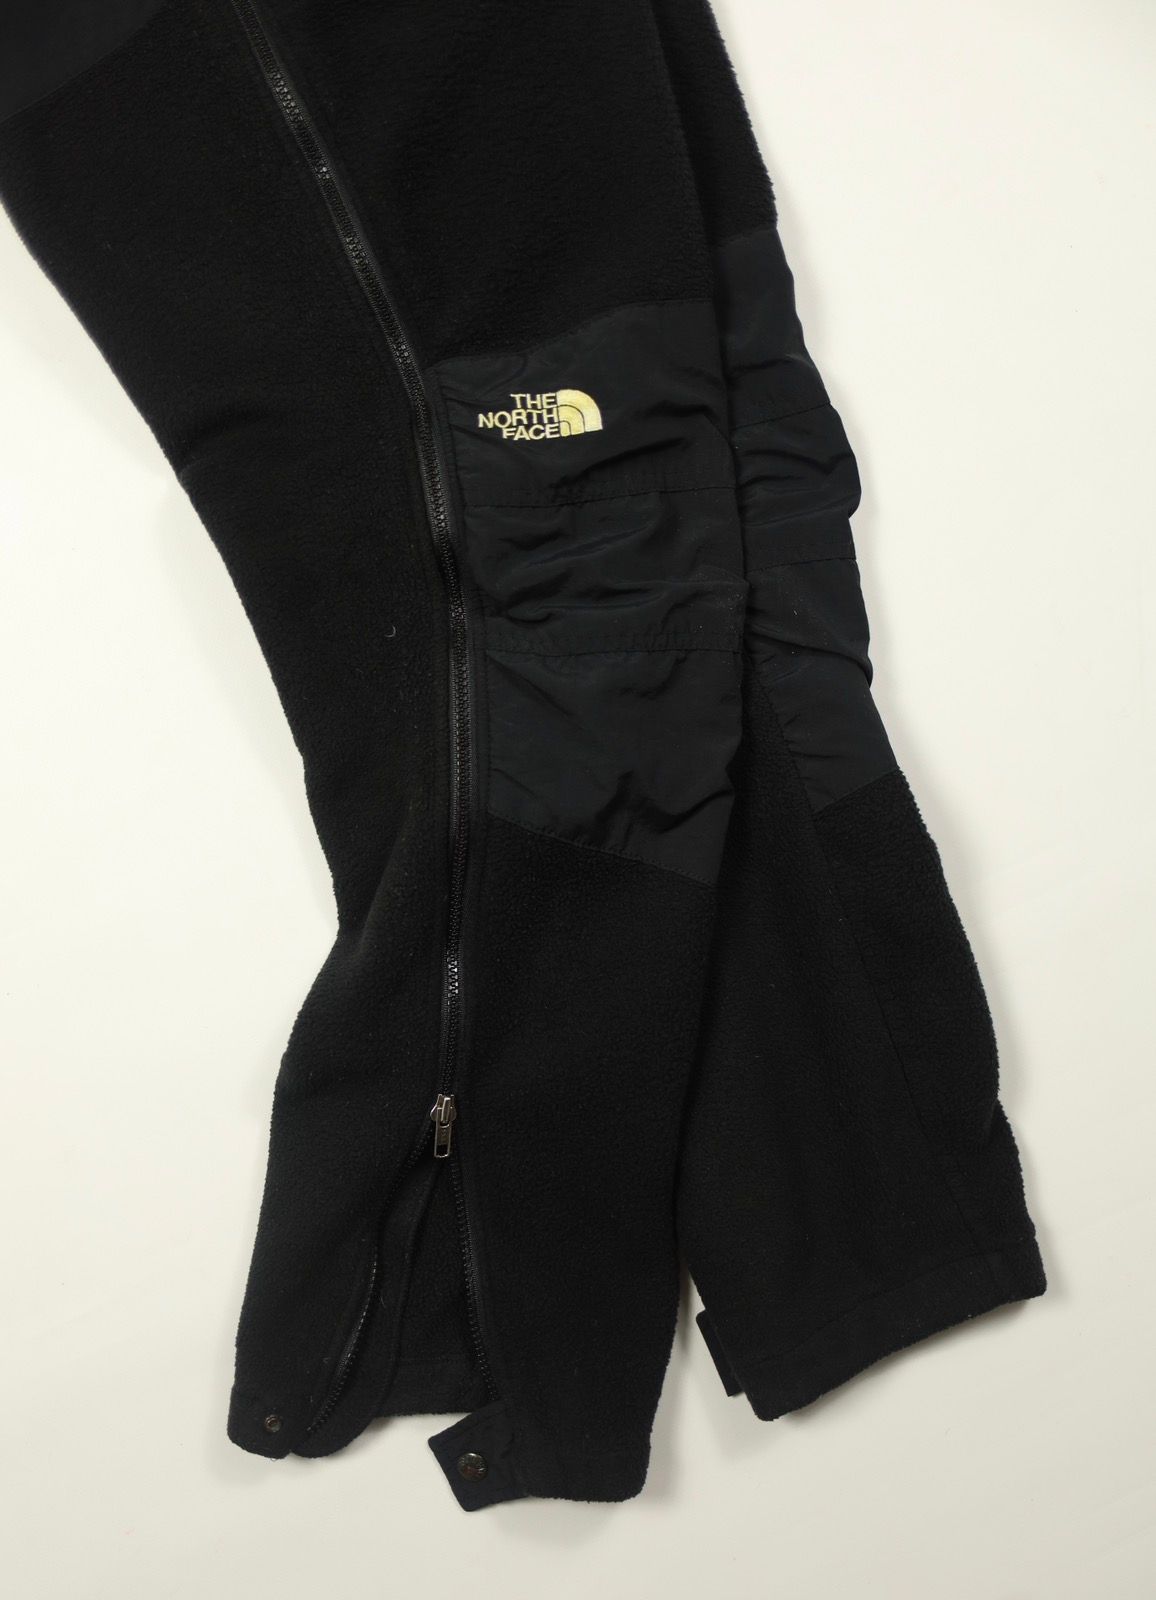 Pre-owned Outdoor Life X The North Face Vintage The North Face Denali Fleece Nylon Track Pants Black (size 30)